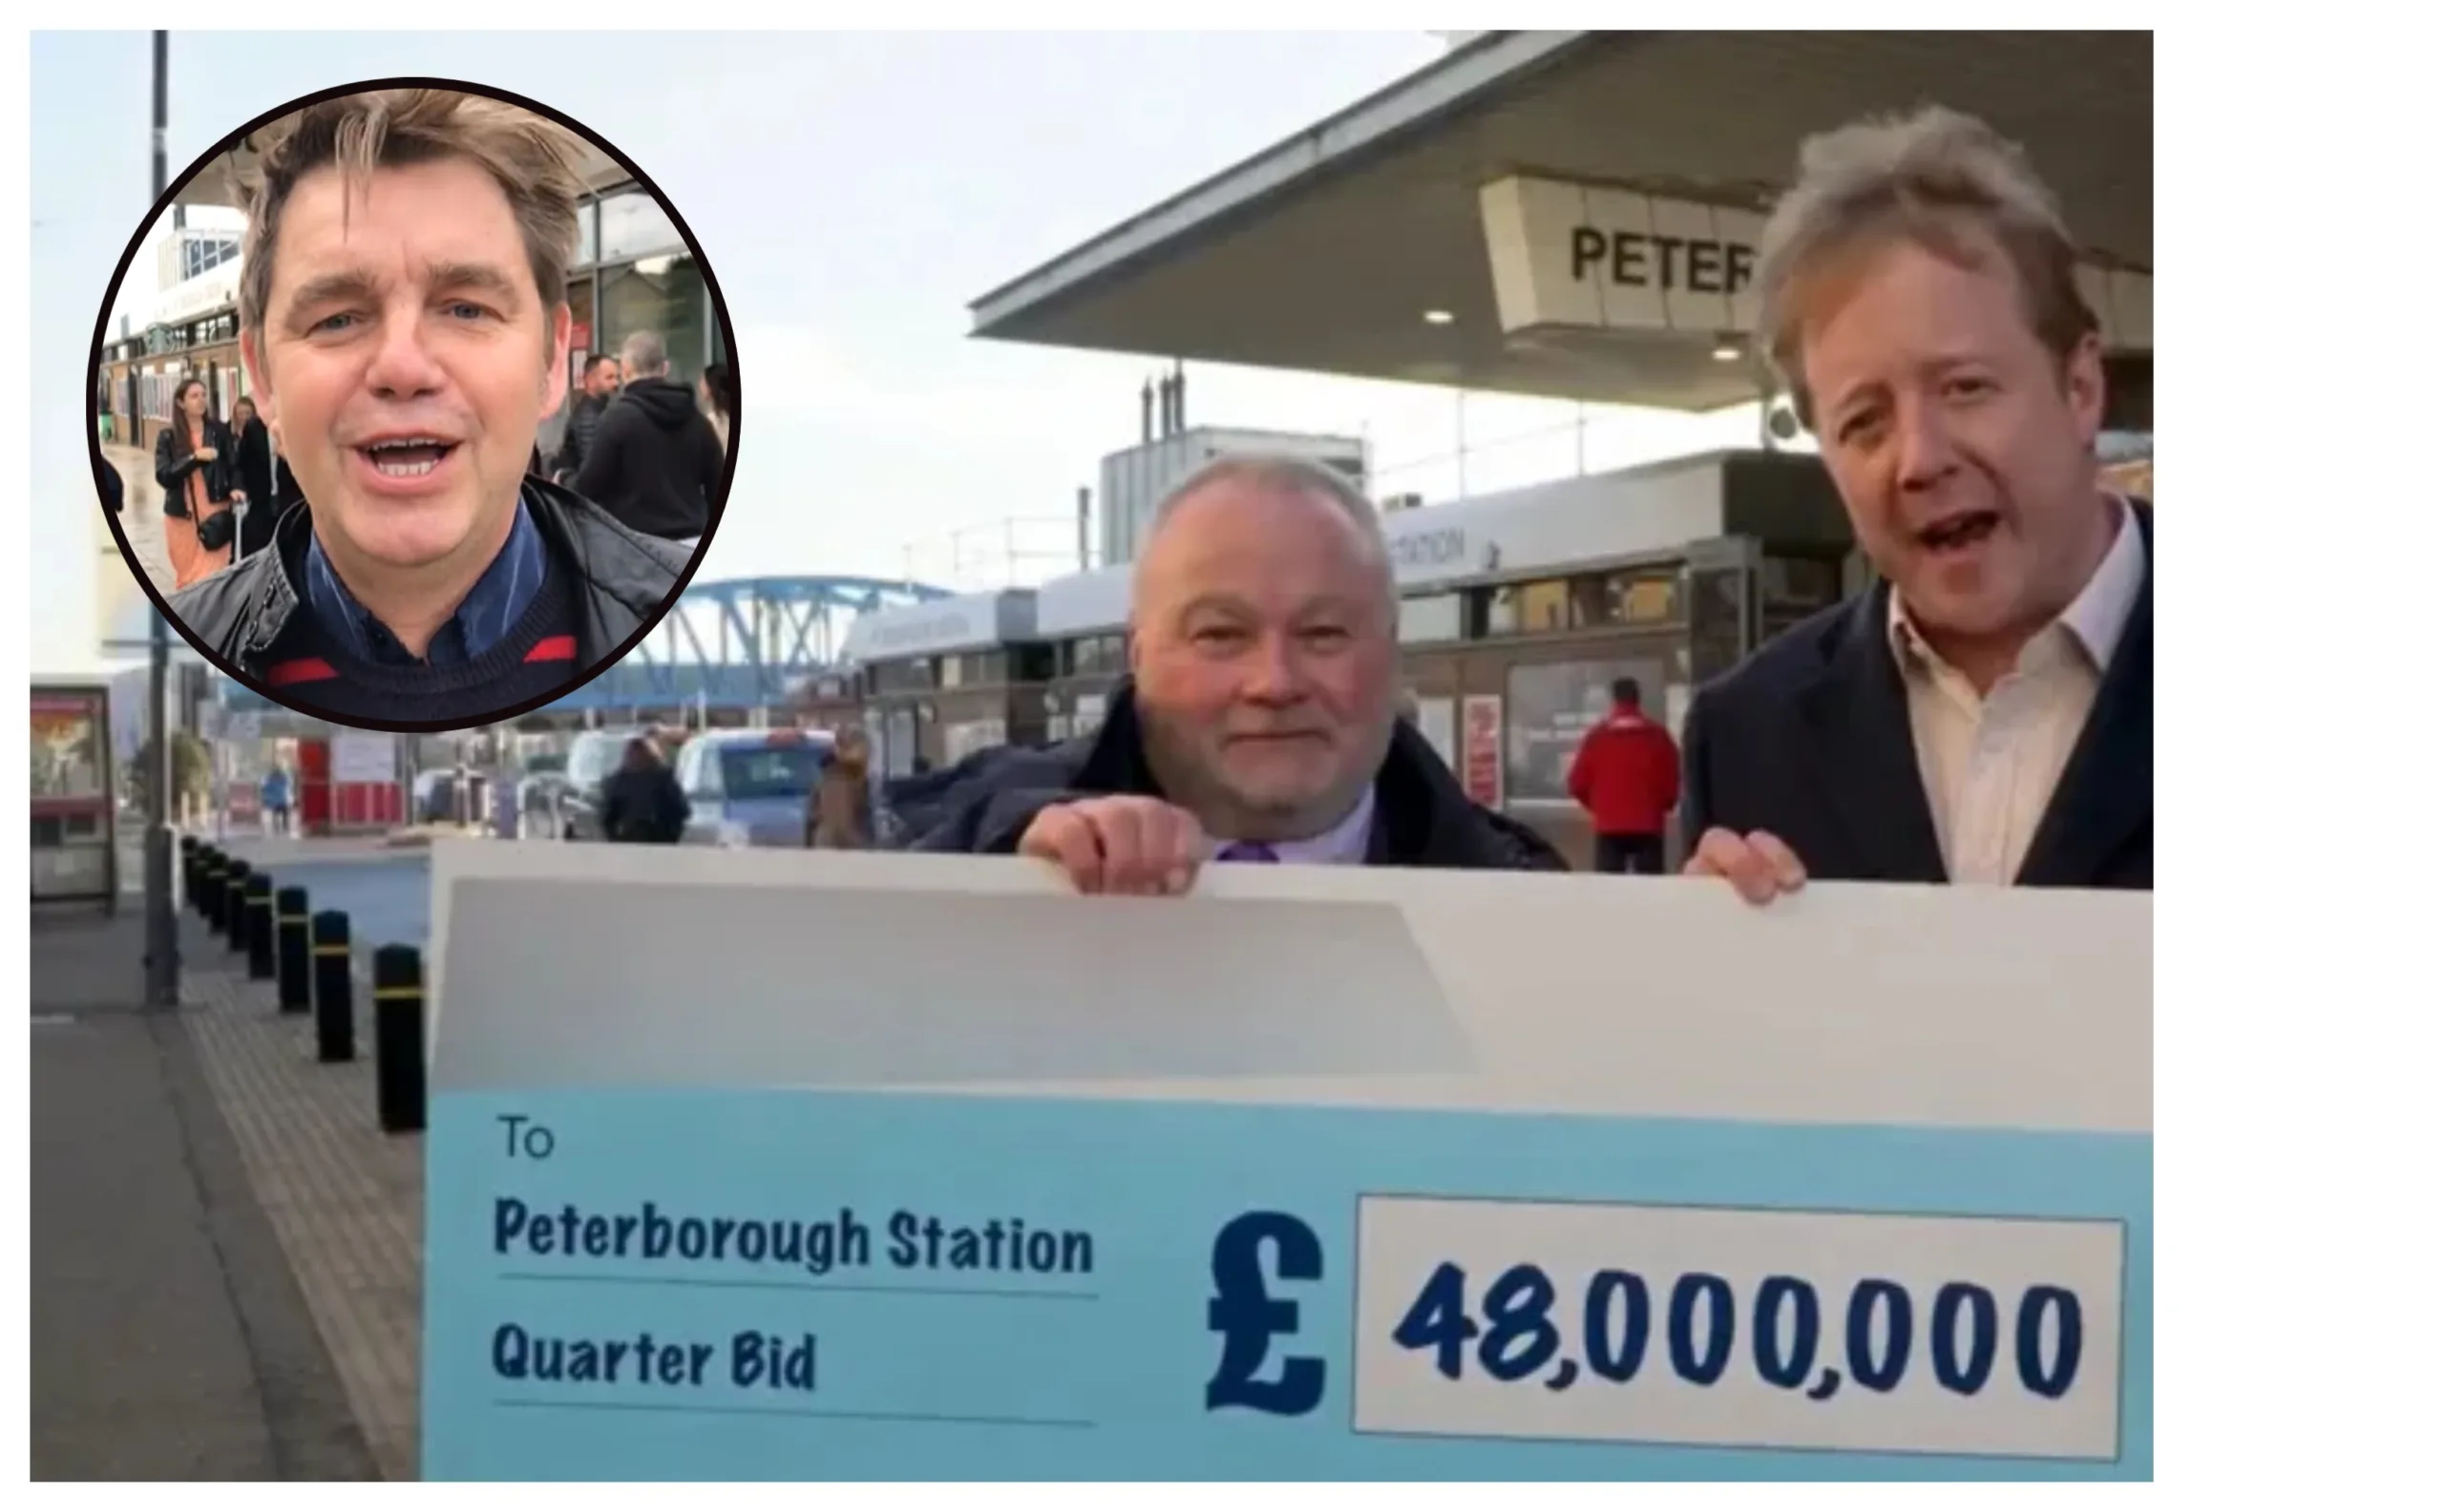 Mayor Dr Nik Johnson (inset) with Peterborough MP Paul Bristow and city council leader Wayne Fitzgerald celebrating the city’s success in winning £48m levelling up cash. Cllr Fitzgerald is also a member of the Combined Authority.